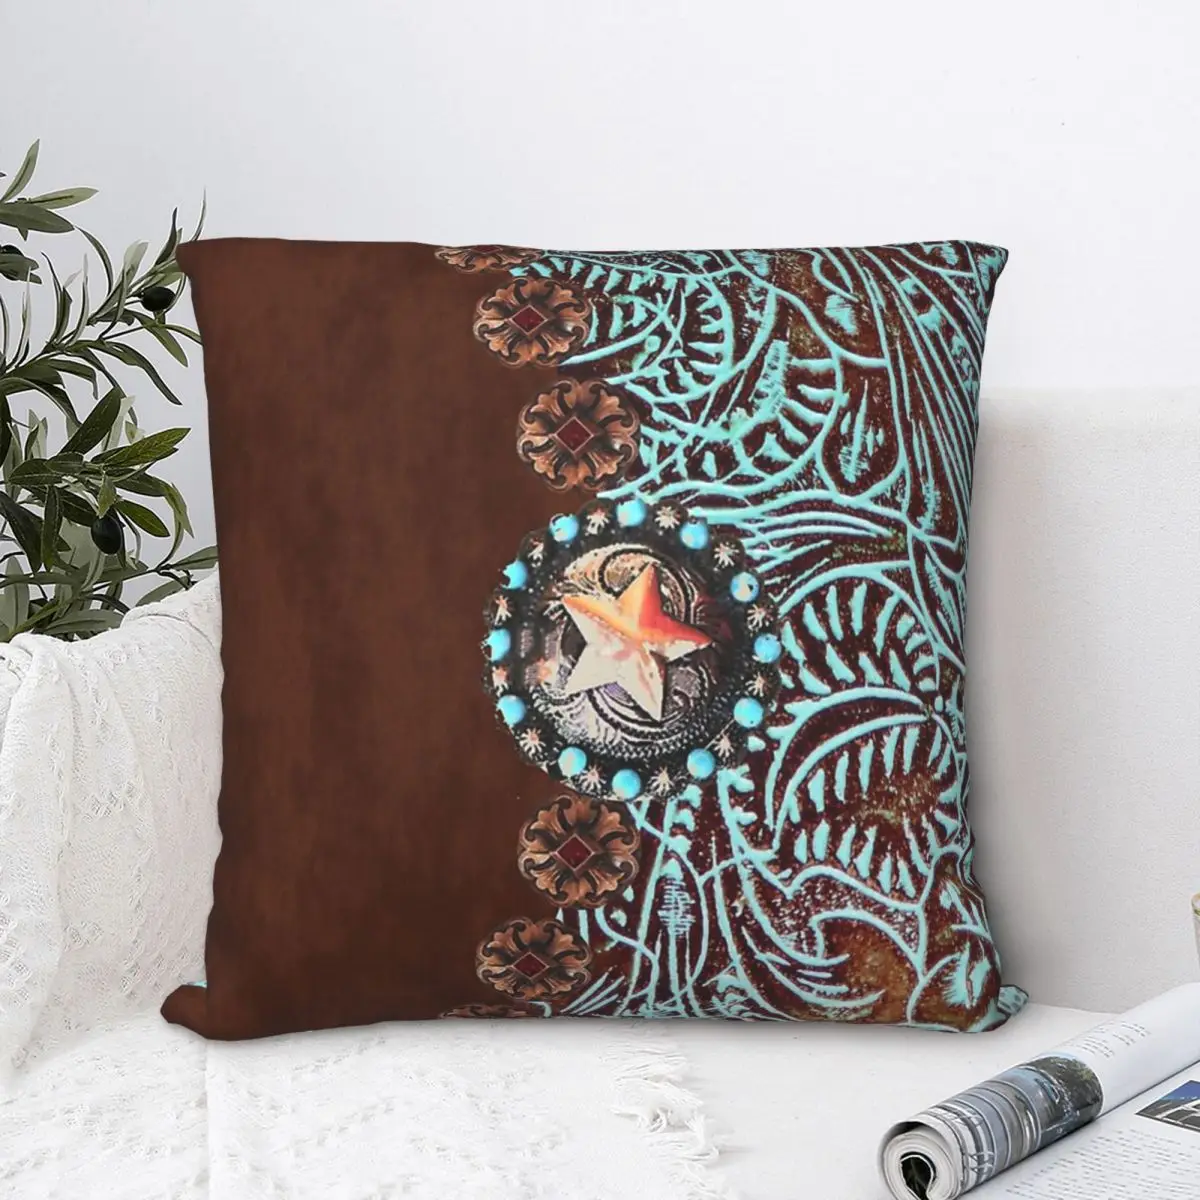 

Primitive Cowboy Cowgirl Western Country Brown Turquoise Throw Pillow Case Cushion For Home Sofa Chair Decorative Hug Pillowcase